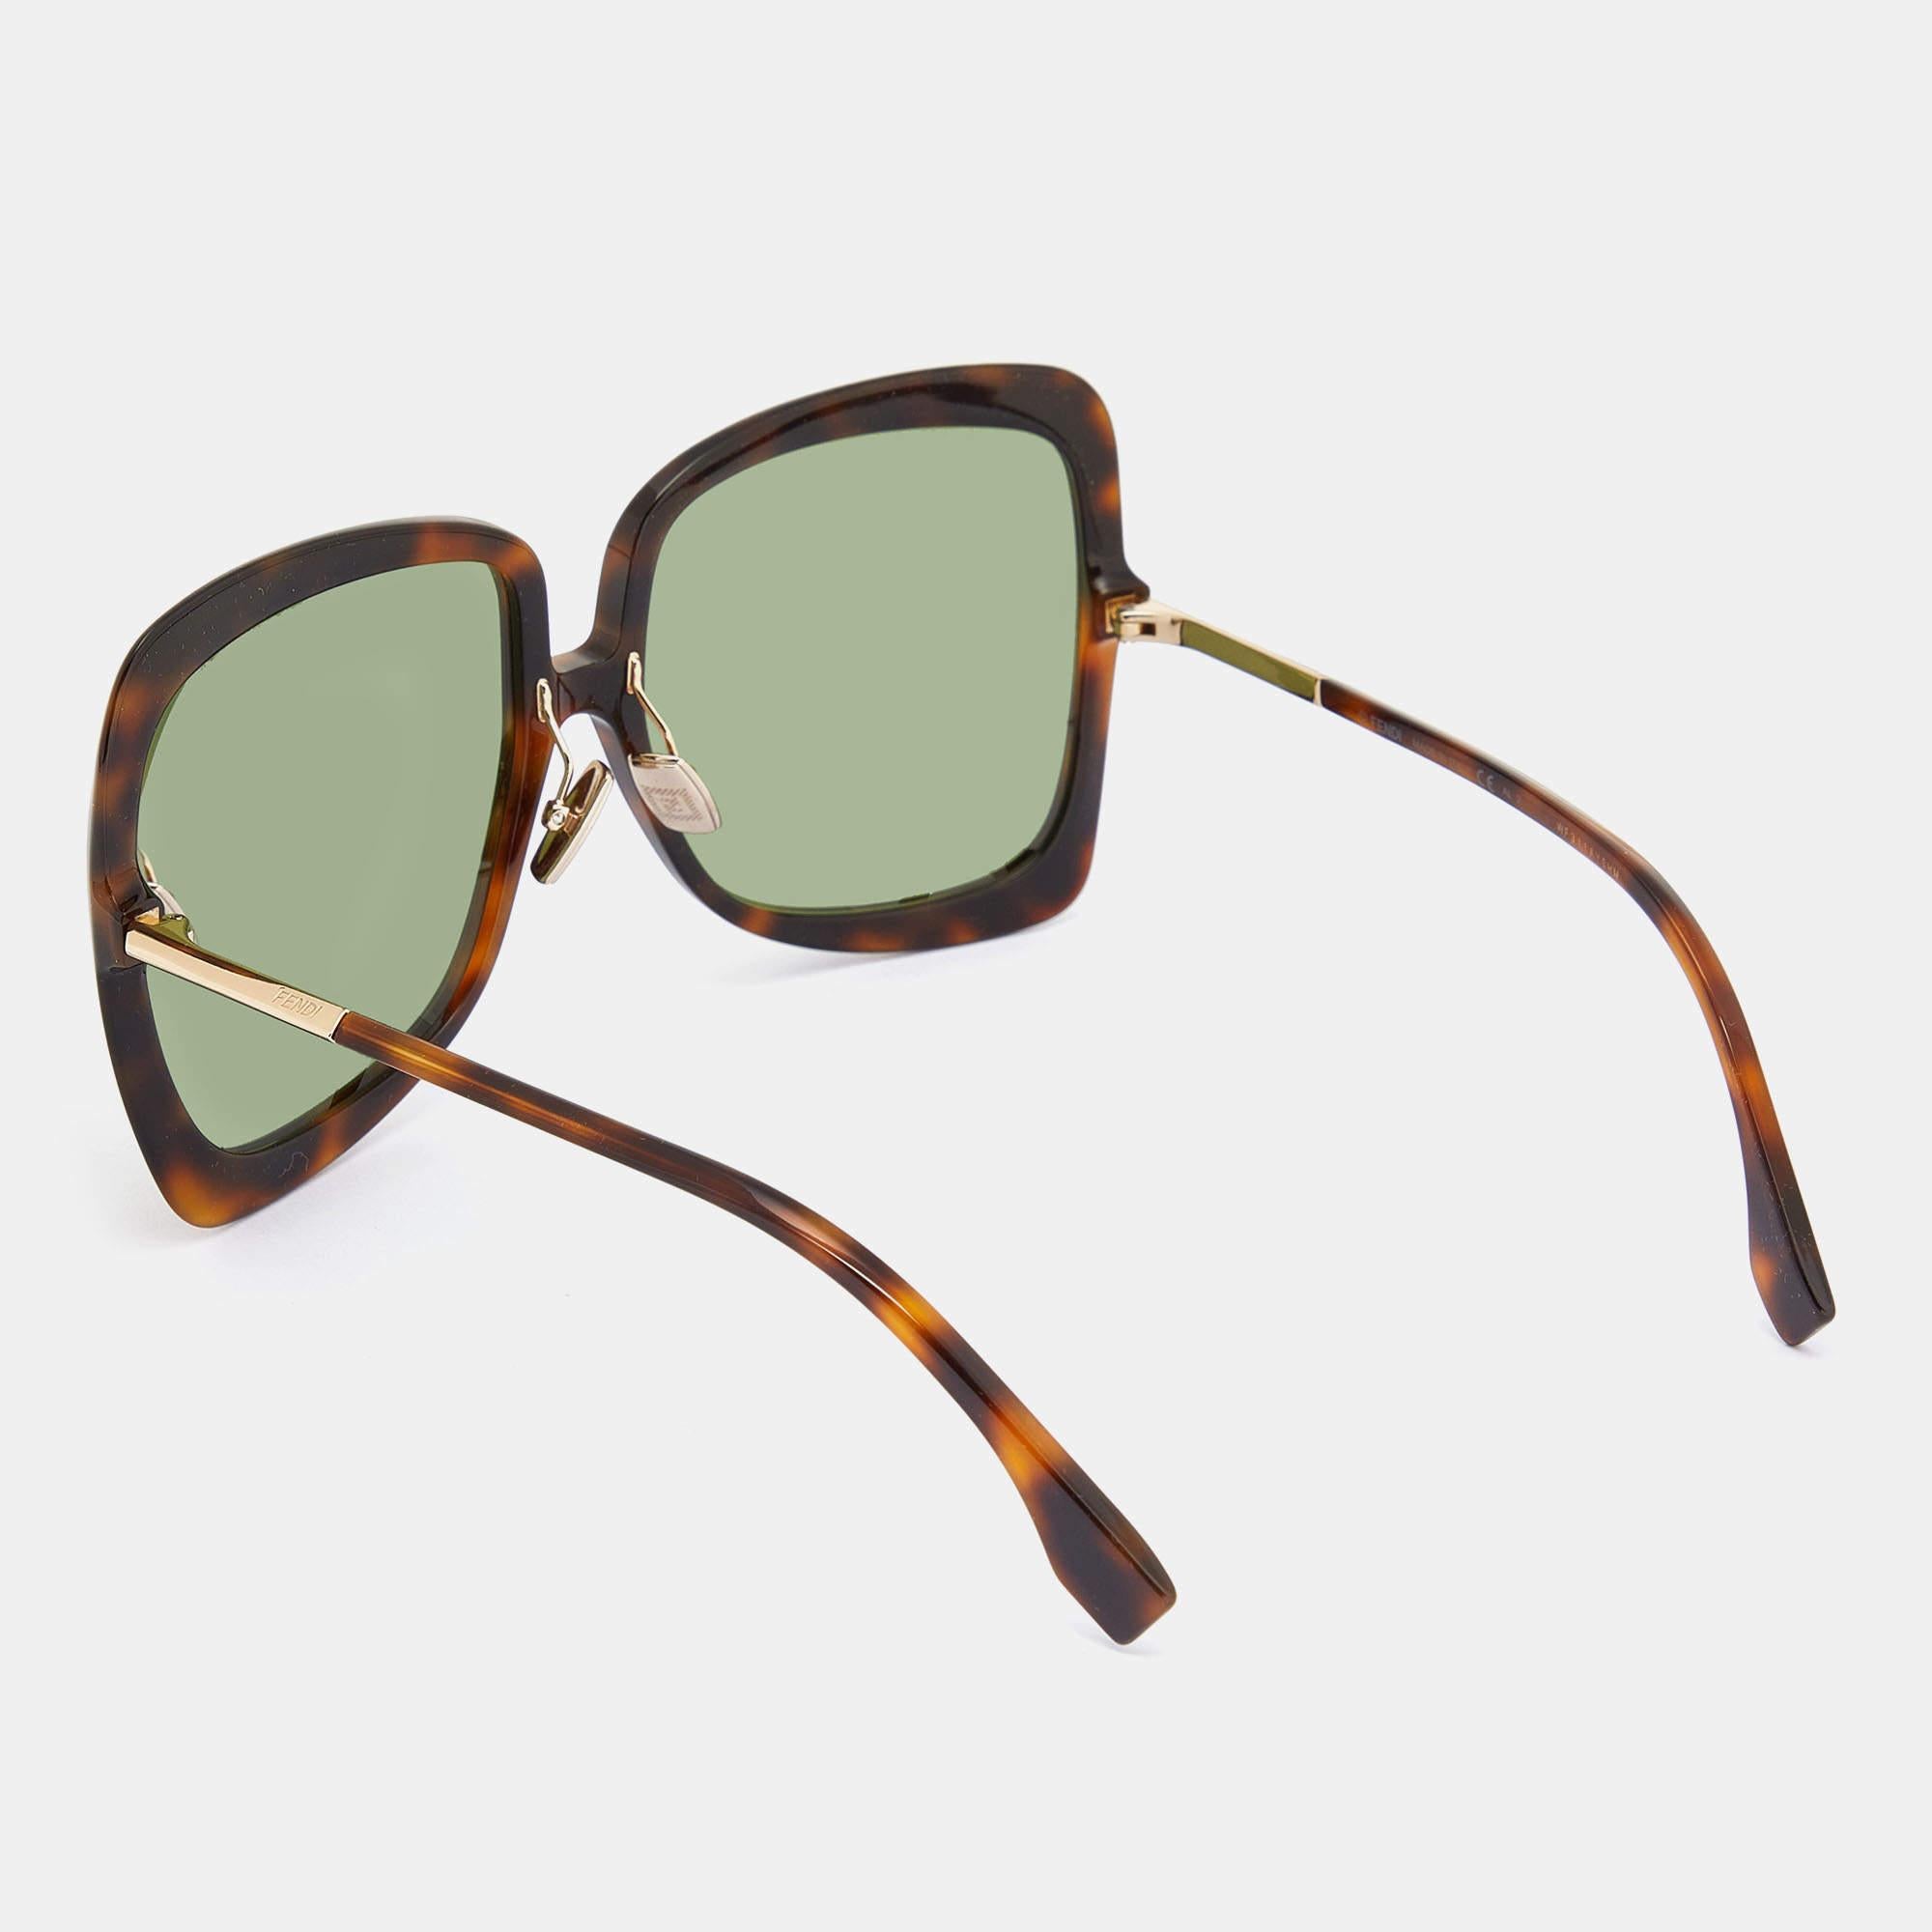 Embrace sunny days in full style with help from this pair of sunglasses by Fendi. Created with expertise, the luxe sunglasses feature a well-designed frame and high-grade lenses that are equipped to protect your eyes.

Includes
Original Box,